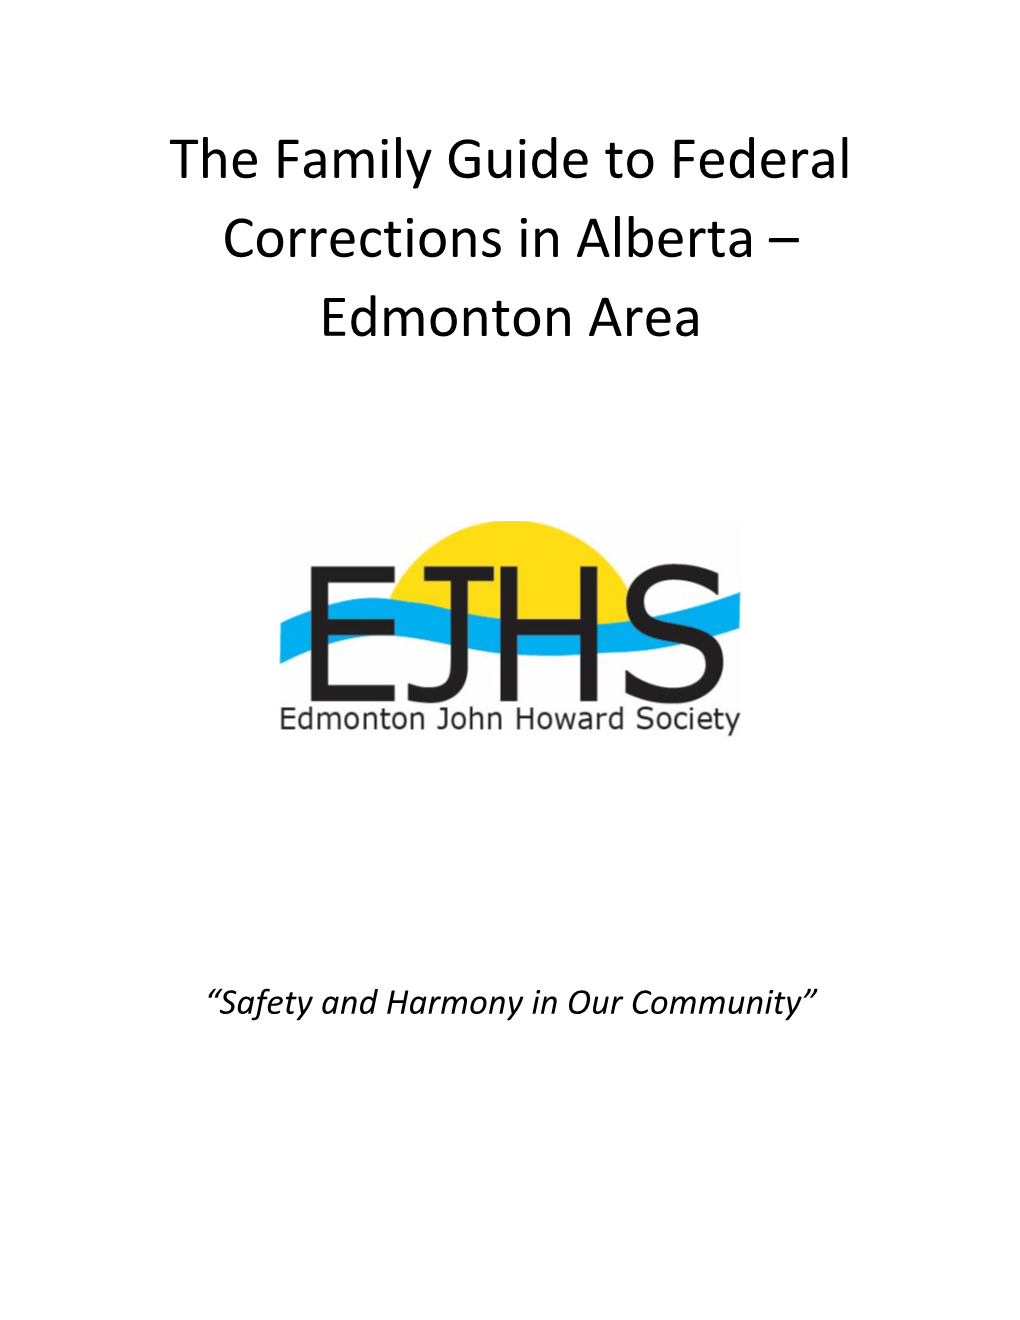 The Family Guide to Federal Corrections in Alberta – Edmonton Area